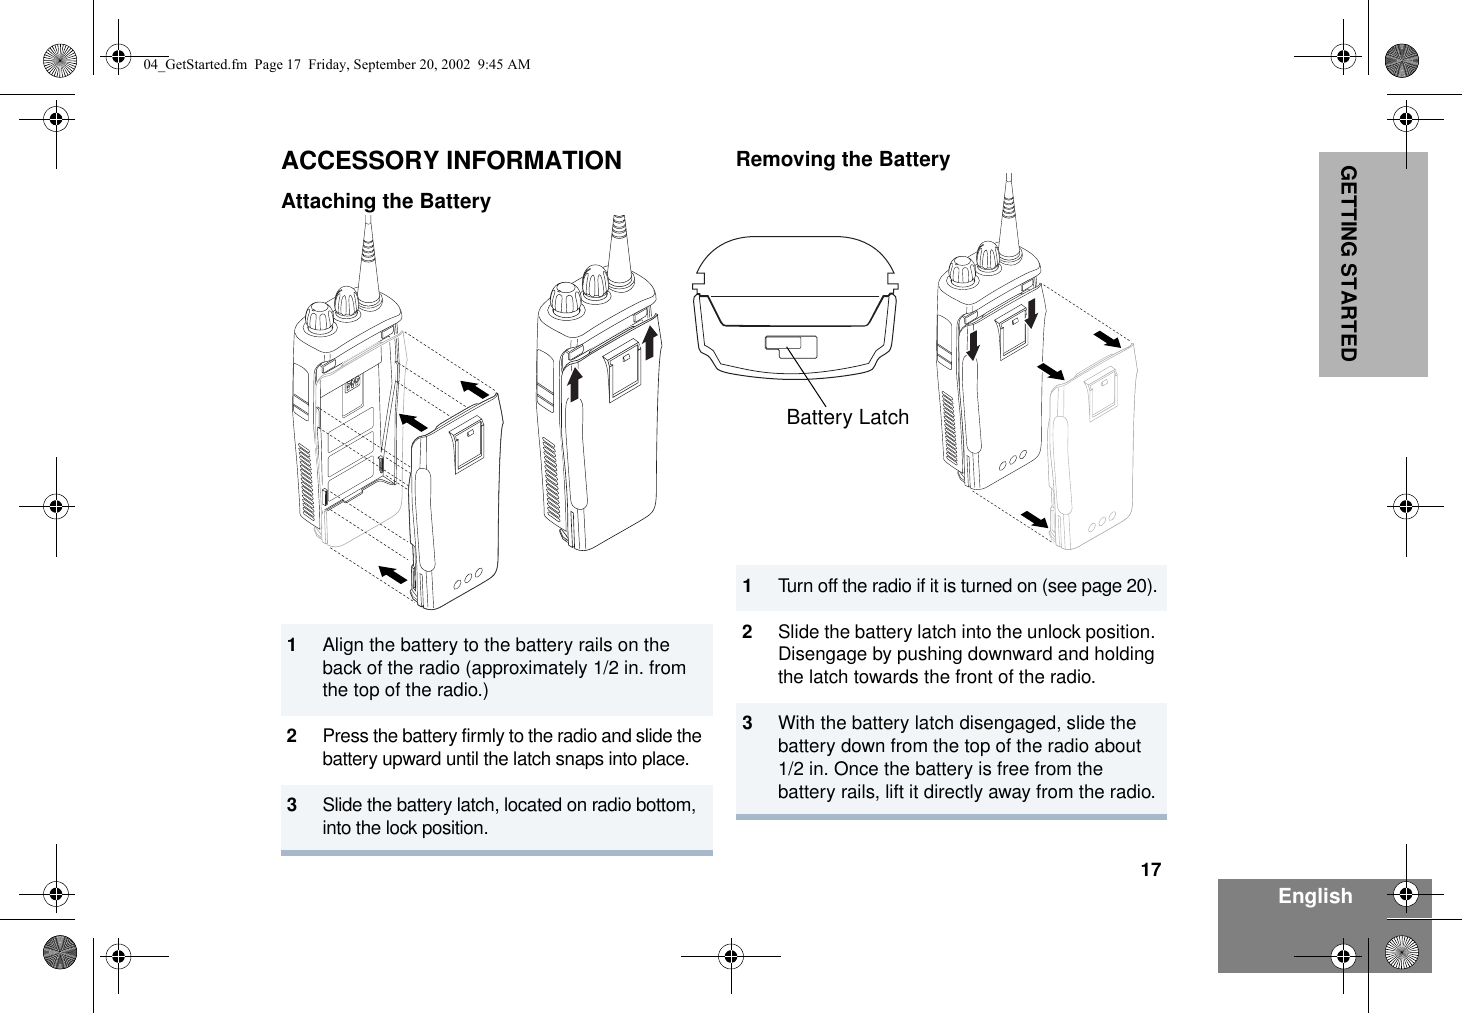 17EnglishGETTING STARTEDACCESSORY INFORMATIONAttaching the BatteryRemoving the Battery1Align the battery to the battery rails on the back of the radio (approximately 1/2 in. from the top of the radio.)2Press the battery firmly to the radio and slide the battery upward until the latch snaps into place.3Slide the battery latch, located on radio bottom,  into the lock position.1Turn off the radio if it is turned on (see page 20).2Slide the battery latch into the unlock position. Disengage by pushing downward and holding the latch towards the front of the radio.3With the battery latch disengaged, slide the battery down from the top of the radio about 1/2 in. Once the battery is free from the battery rails, lift it directly away from the radio.Battery Latch04_GetStarted.fm  Page 17  Friday, September 20, 2002  9:45 AM